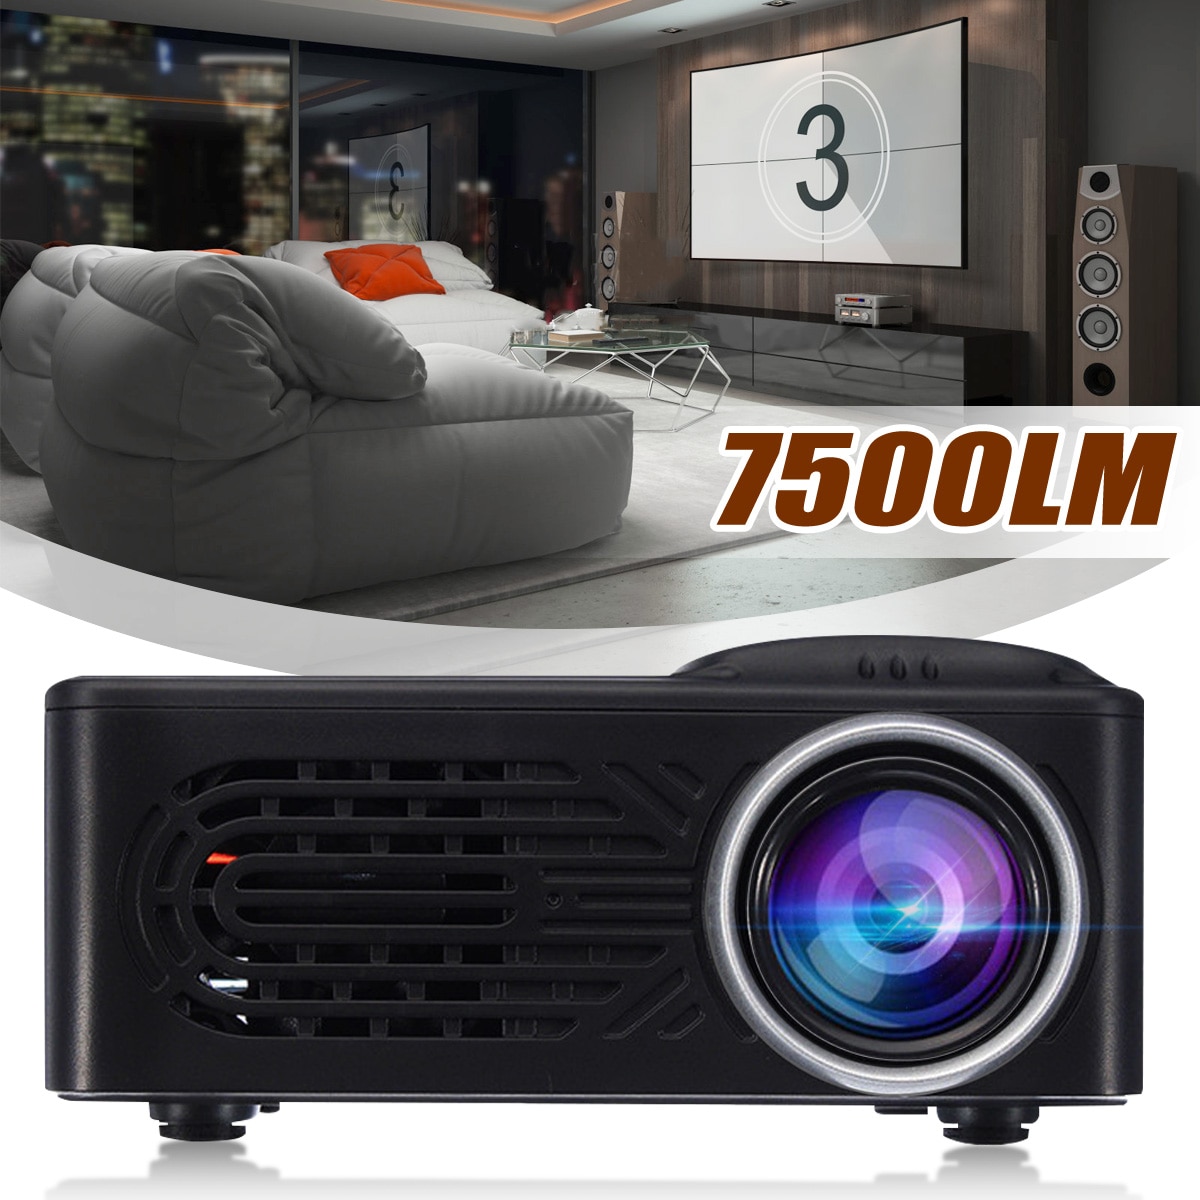 Leory 7500 Lumens 1080P Hd Led Draagbare Projector 320X240 Resolutie Multimedia Home Cinema Film Beamer Video theater